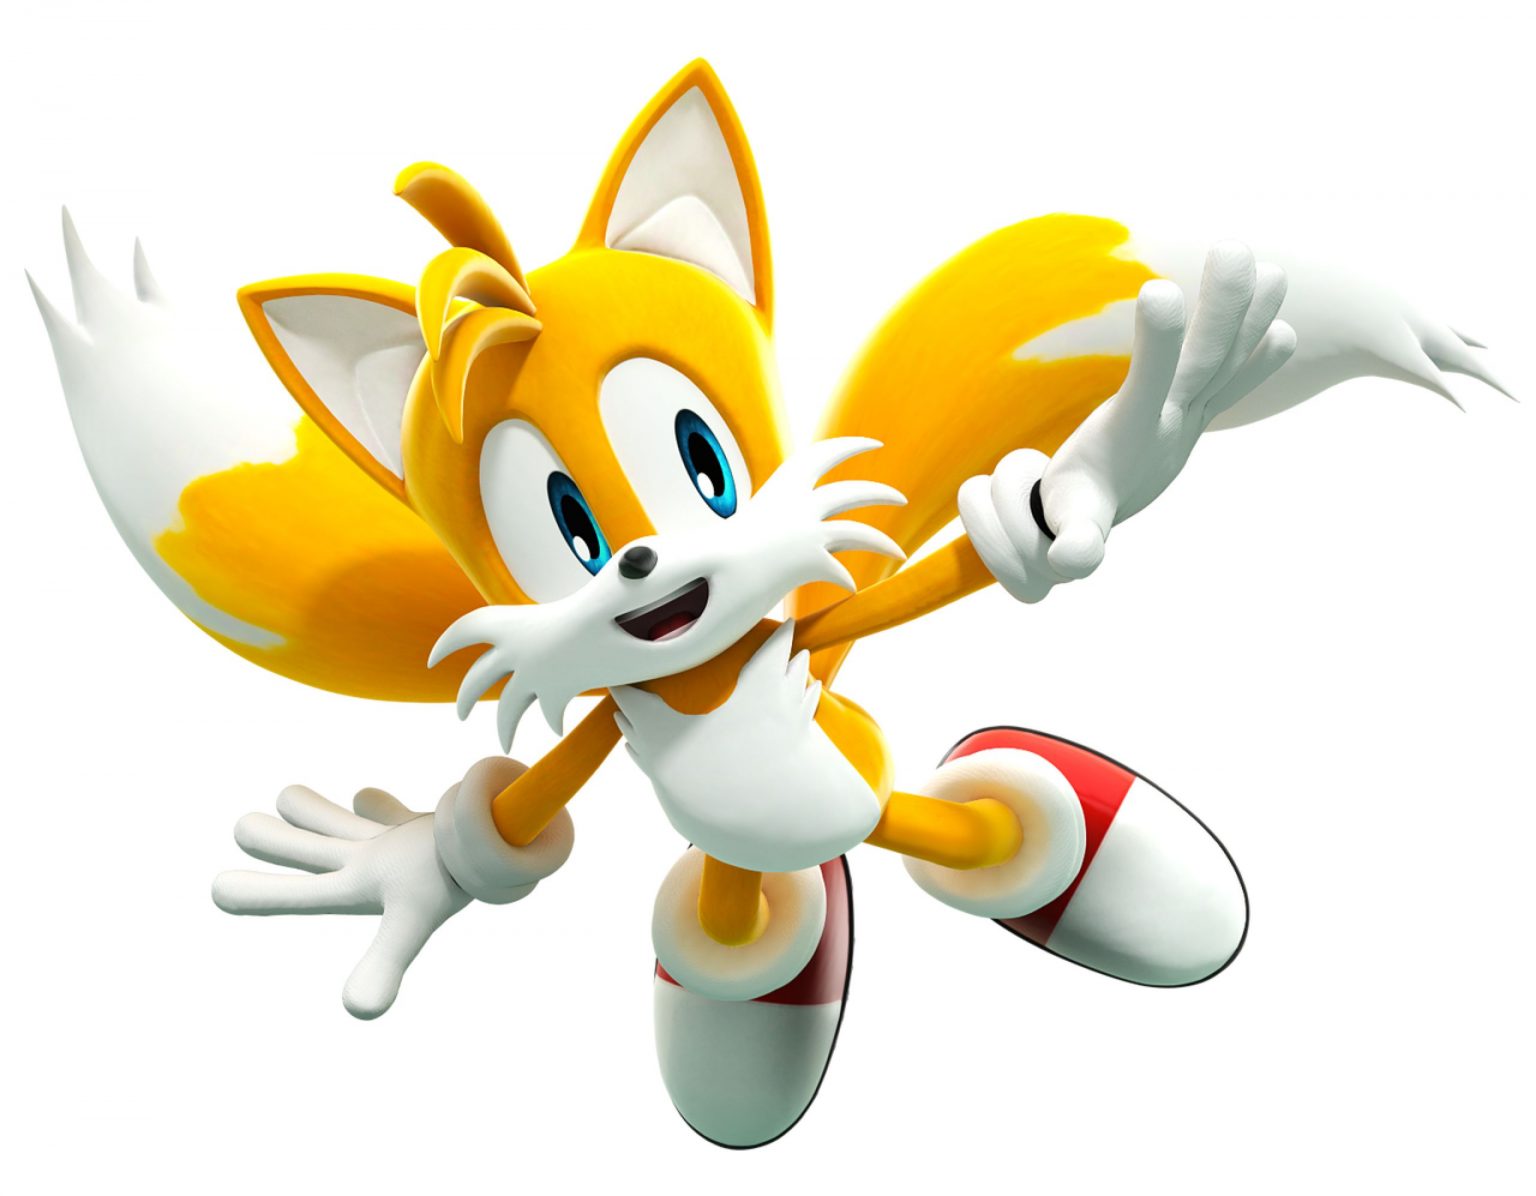 Tails from Sonic the Hedgehog: A Guide to the Fox's History and Fun ...